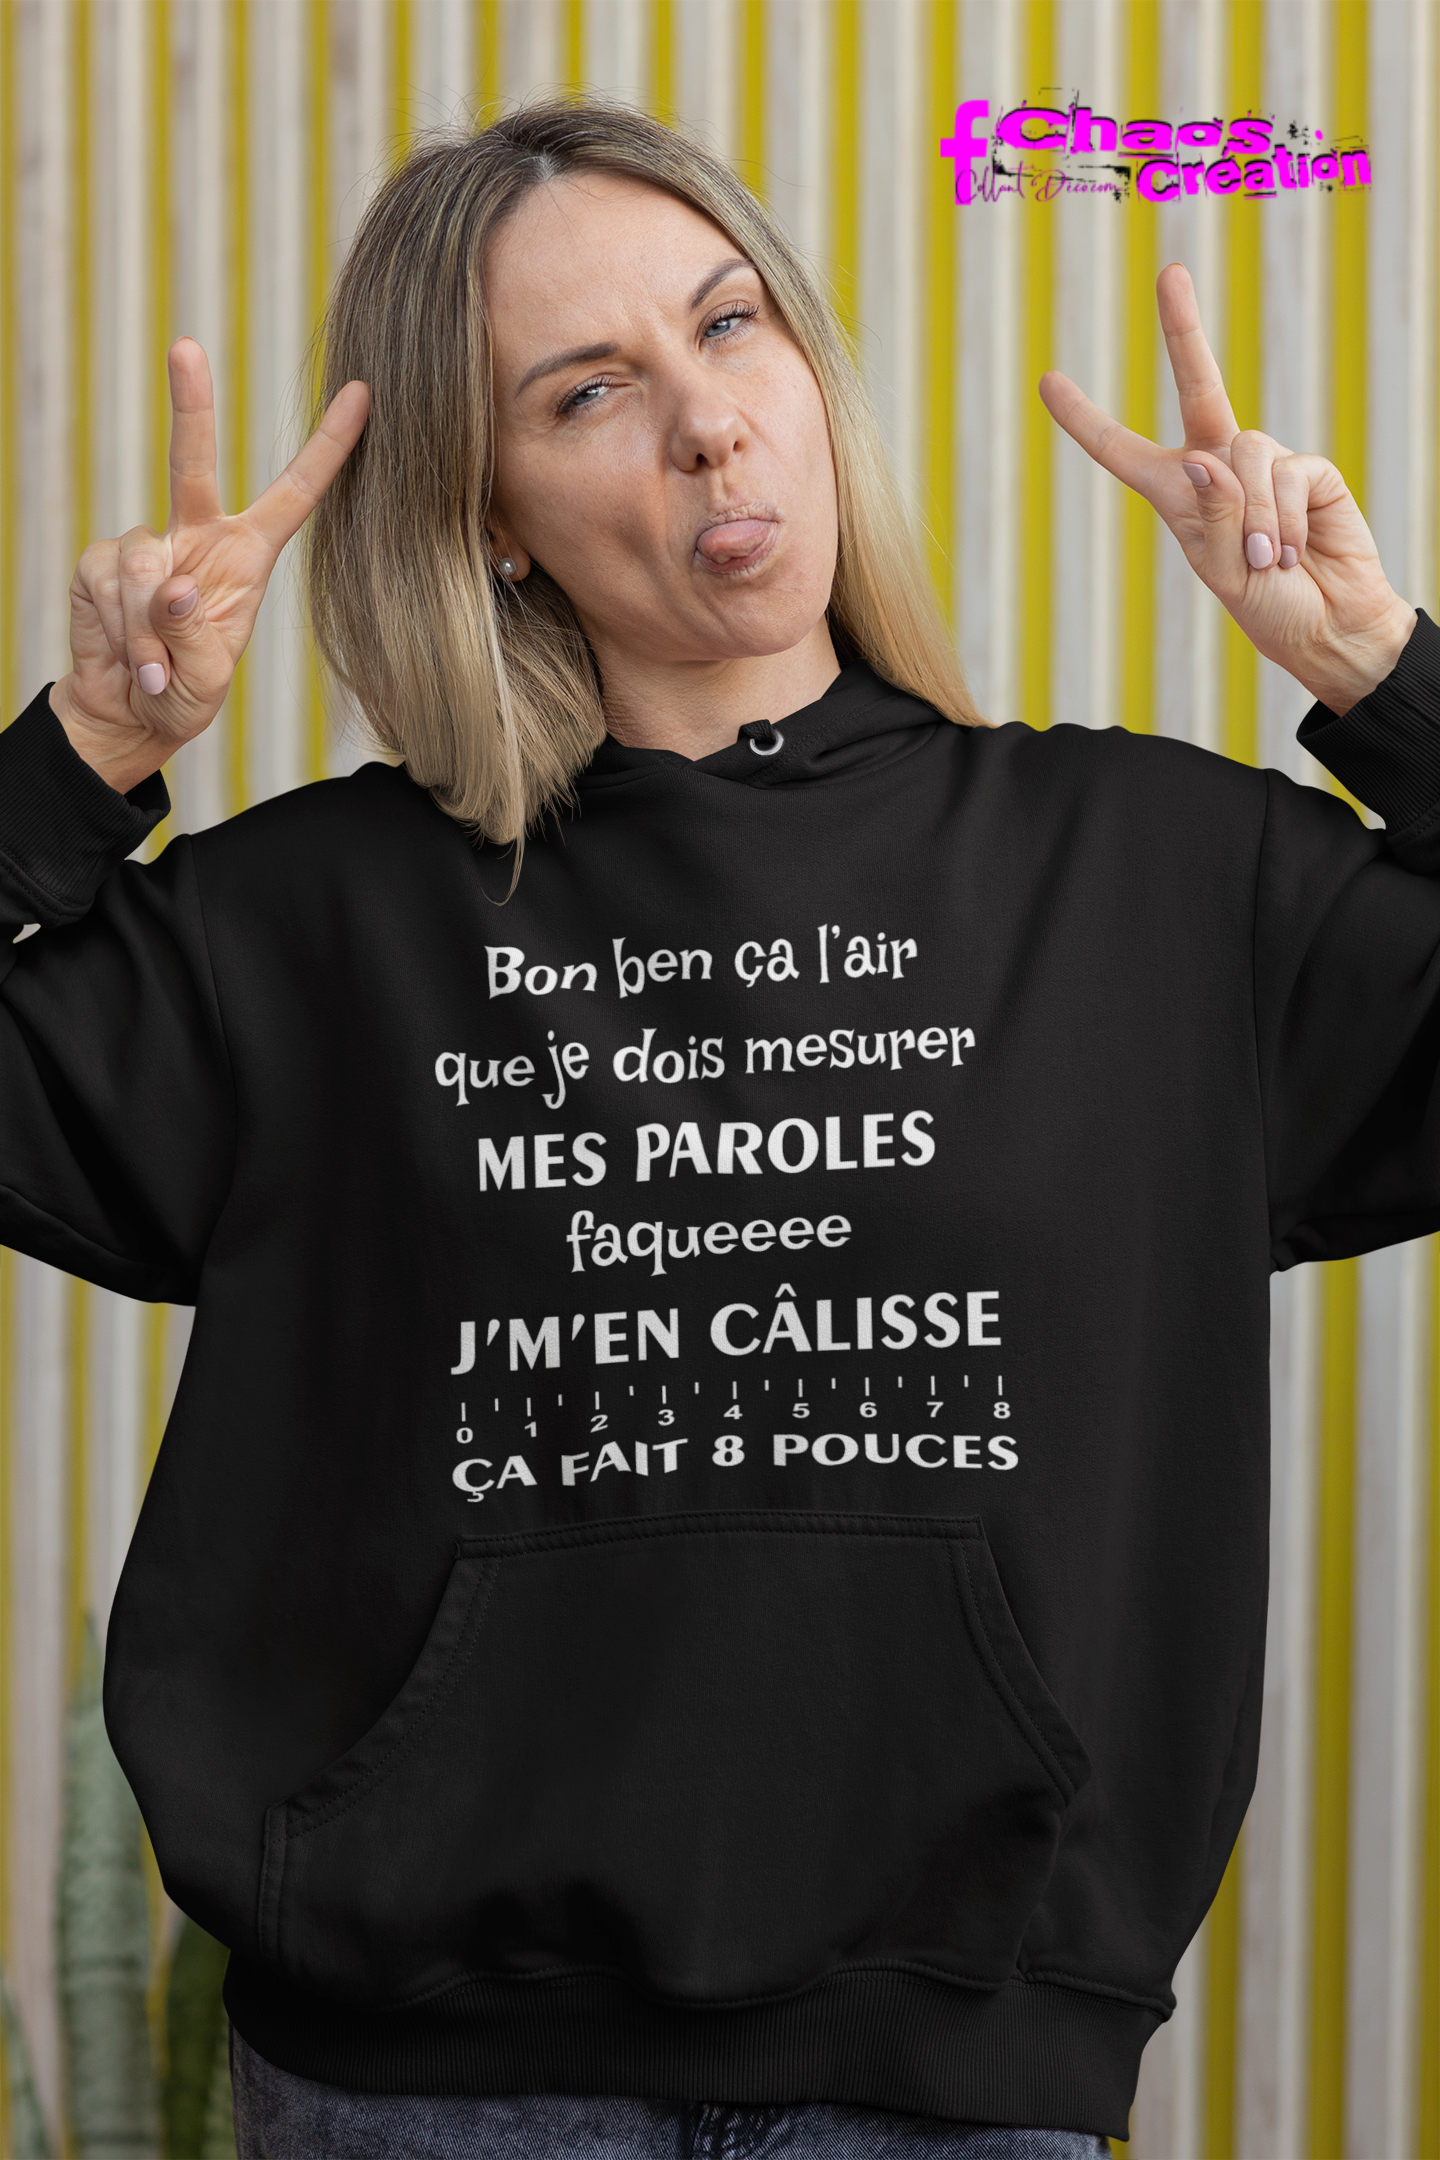 hoodie-mockup-of-a-woman-sticking-out-her-tongue-and-making-a-peace-with-her-hands-m22394 (1)